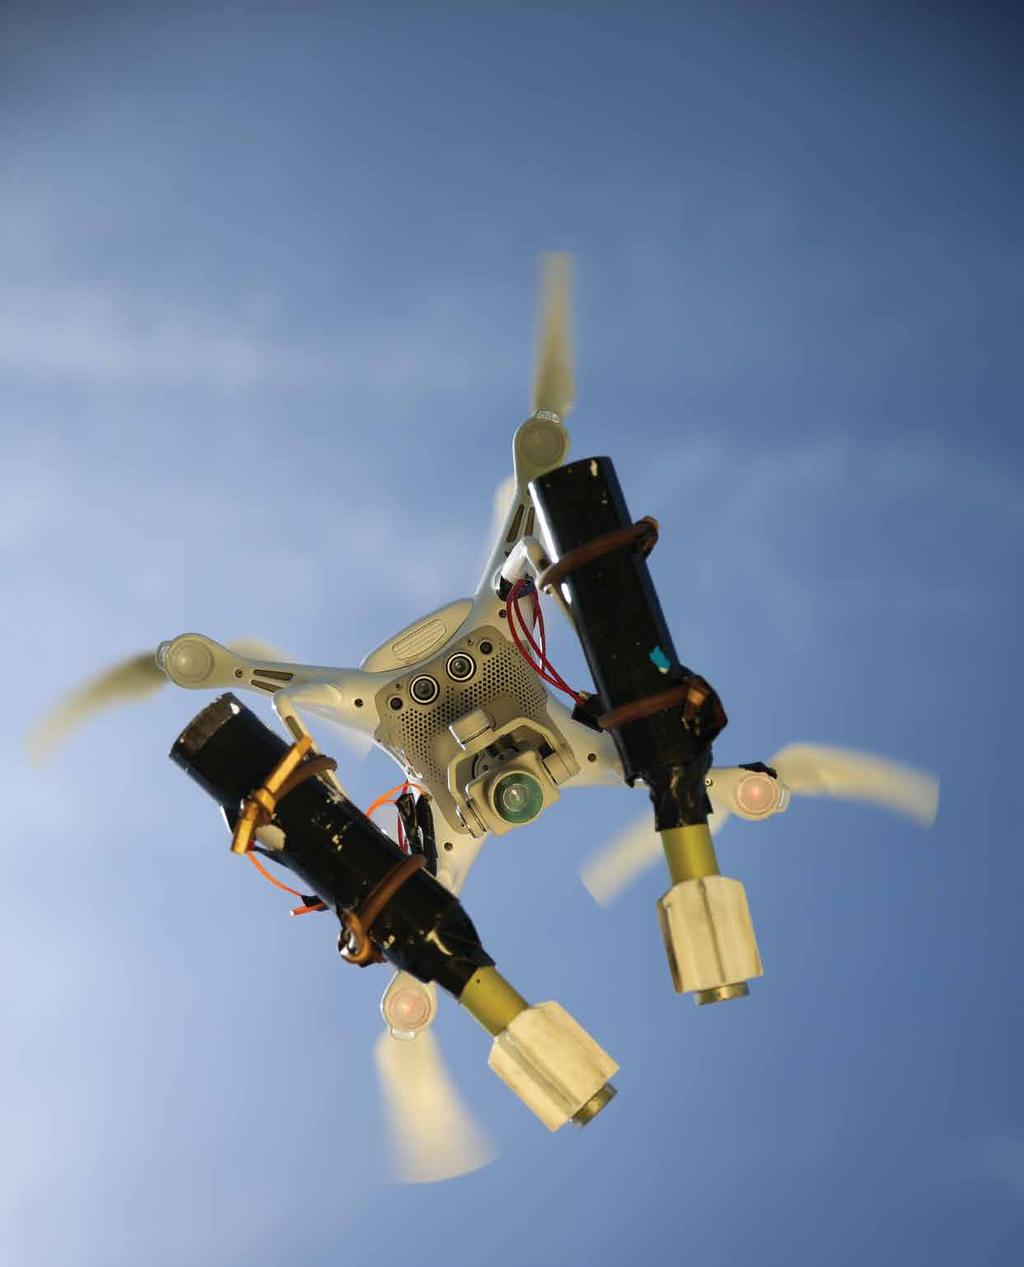 08 09 C-UAS CONTROL AND VIDEO LINKS Trust the Sky Net family of jamming Defeat the threat Control and video link standards are often proprietary to the manufacturer, but could use some or all of the